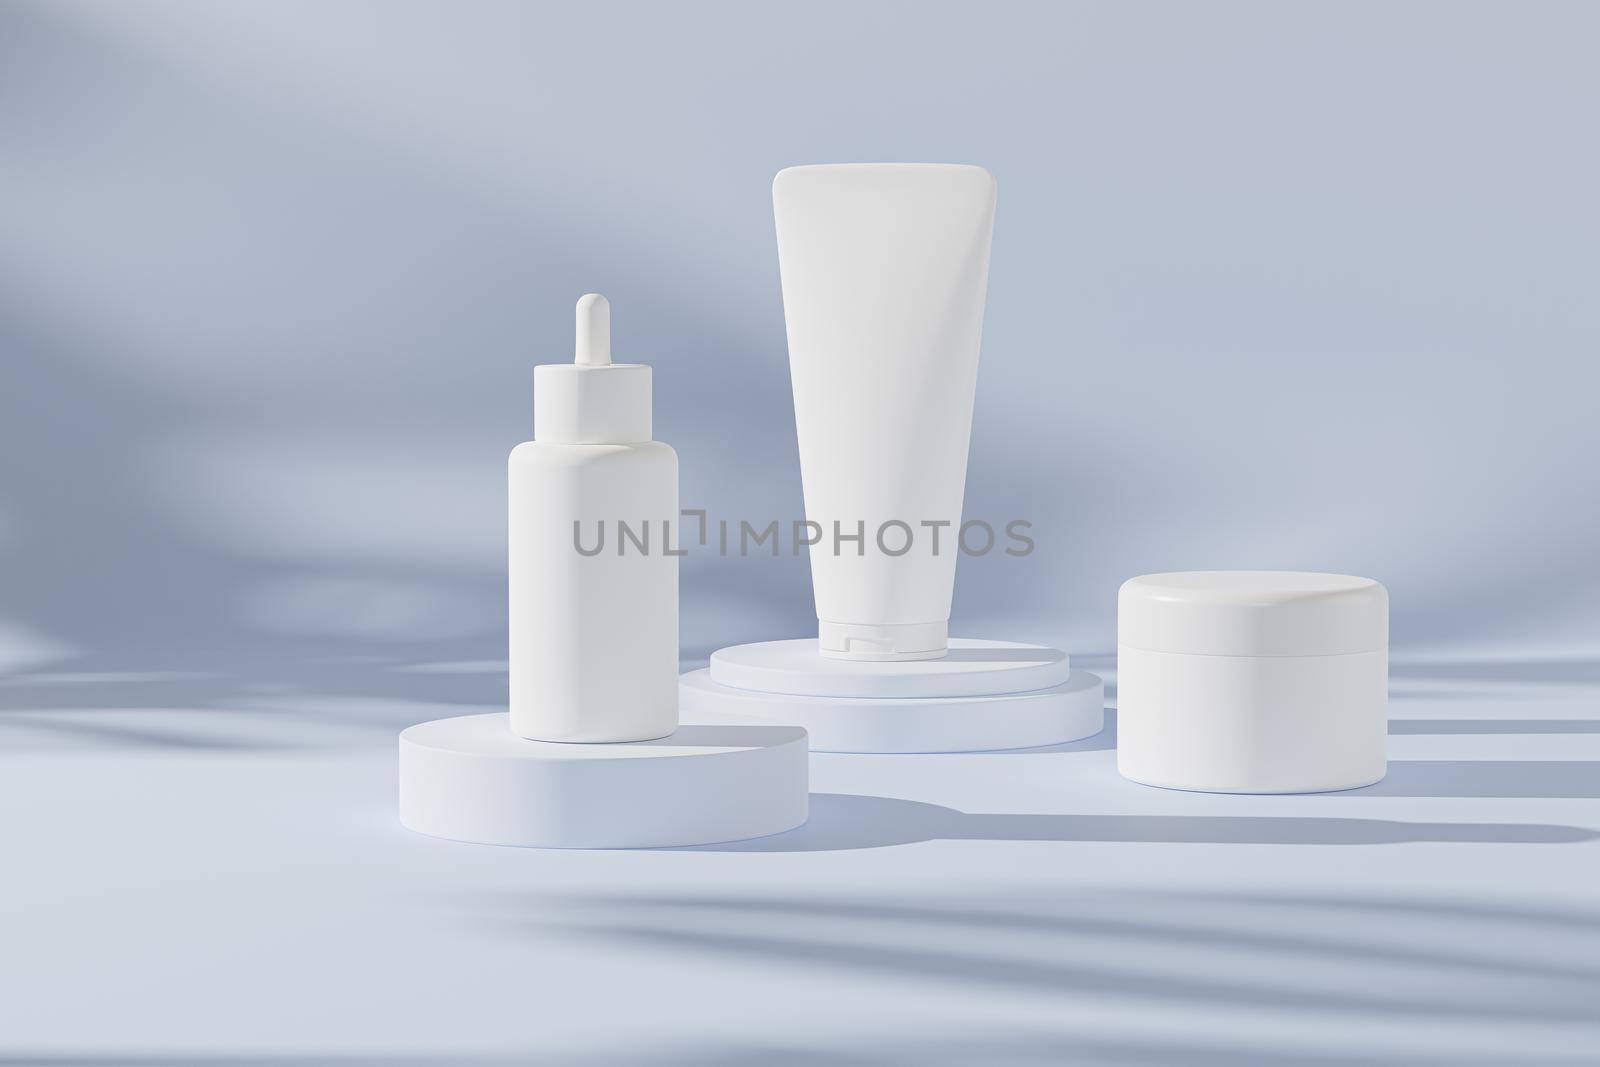 Mockup dropper bottle, lotion tube and cream jar for cosmetics products or advertising on neutral blue background, 3d illustration render